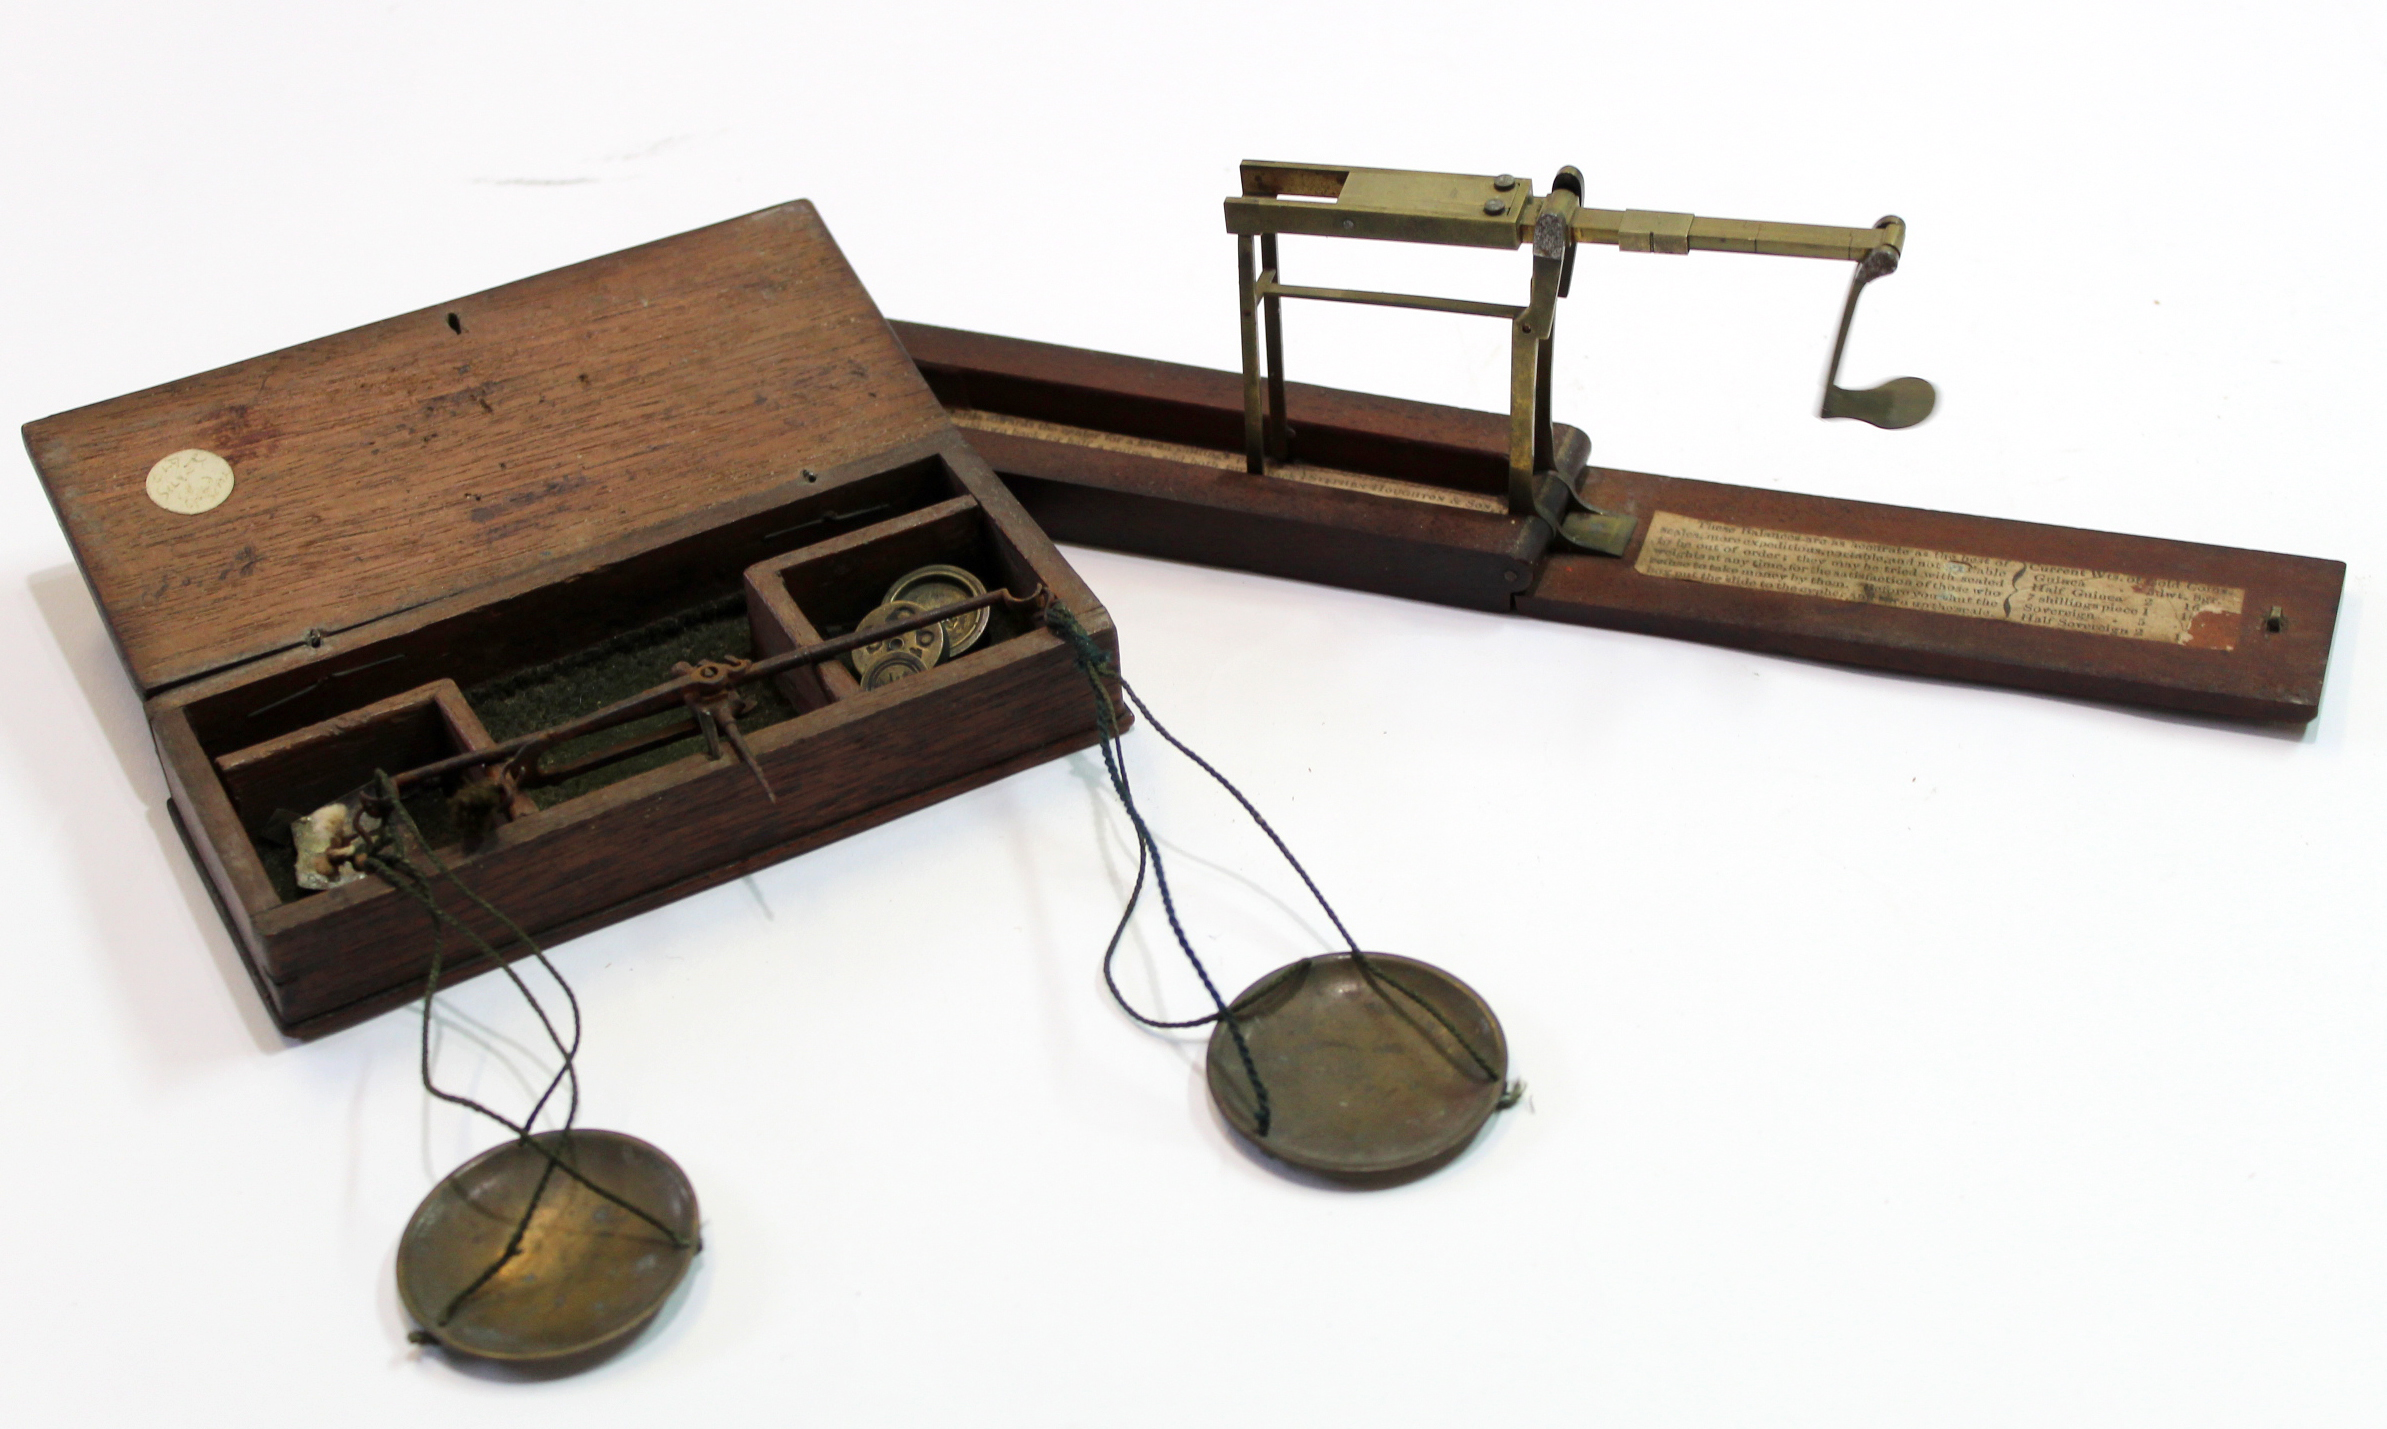 Weighing machine for coinage in small wooden box, together with a set of scales and small weights in